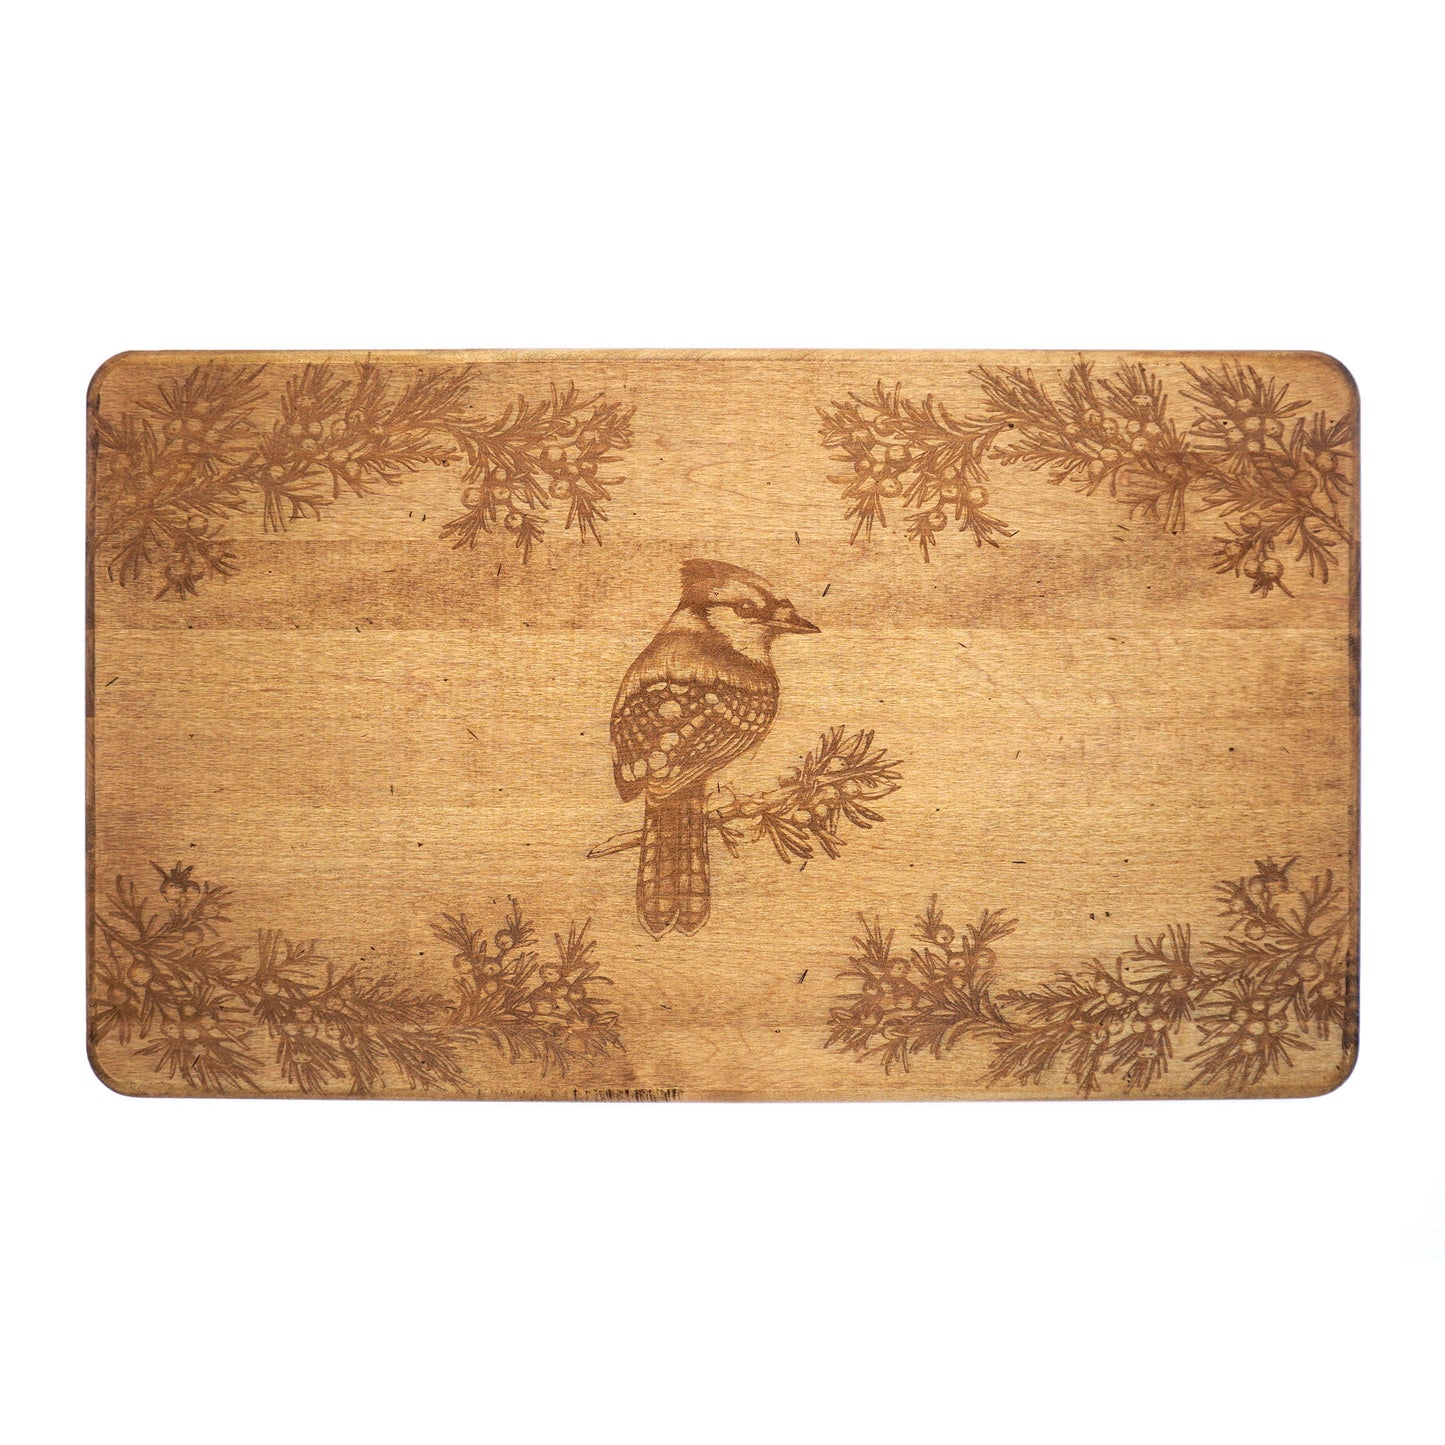 Laura Zindel Maple Artisan Serving Board - More designs available